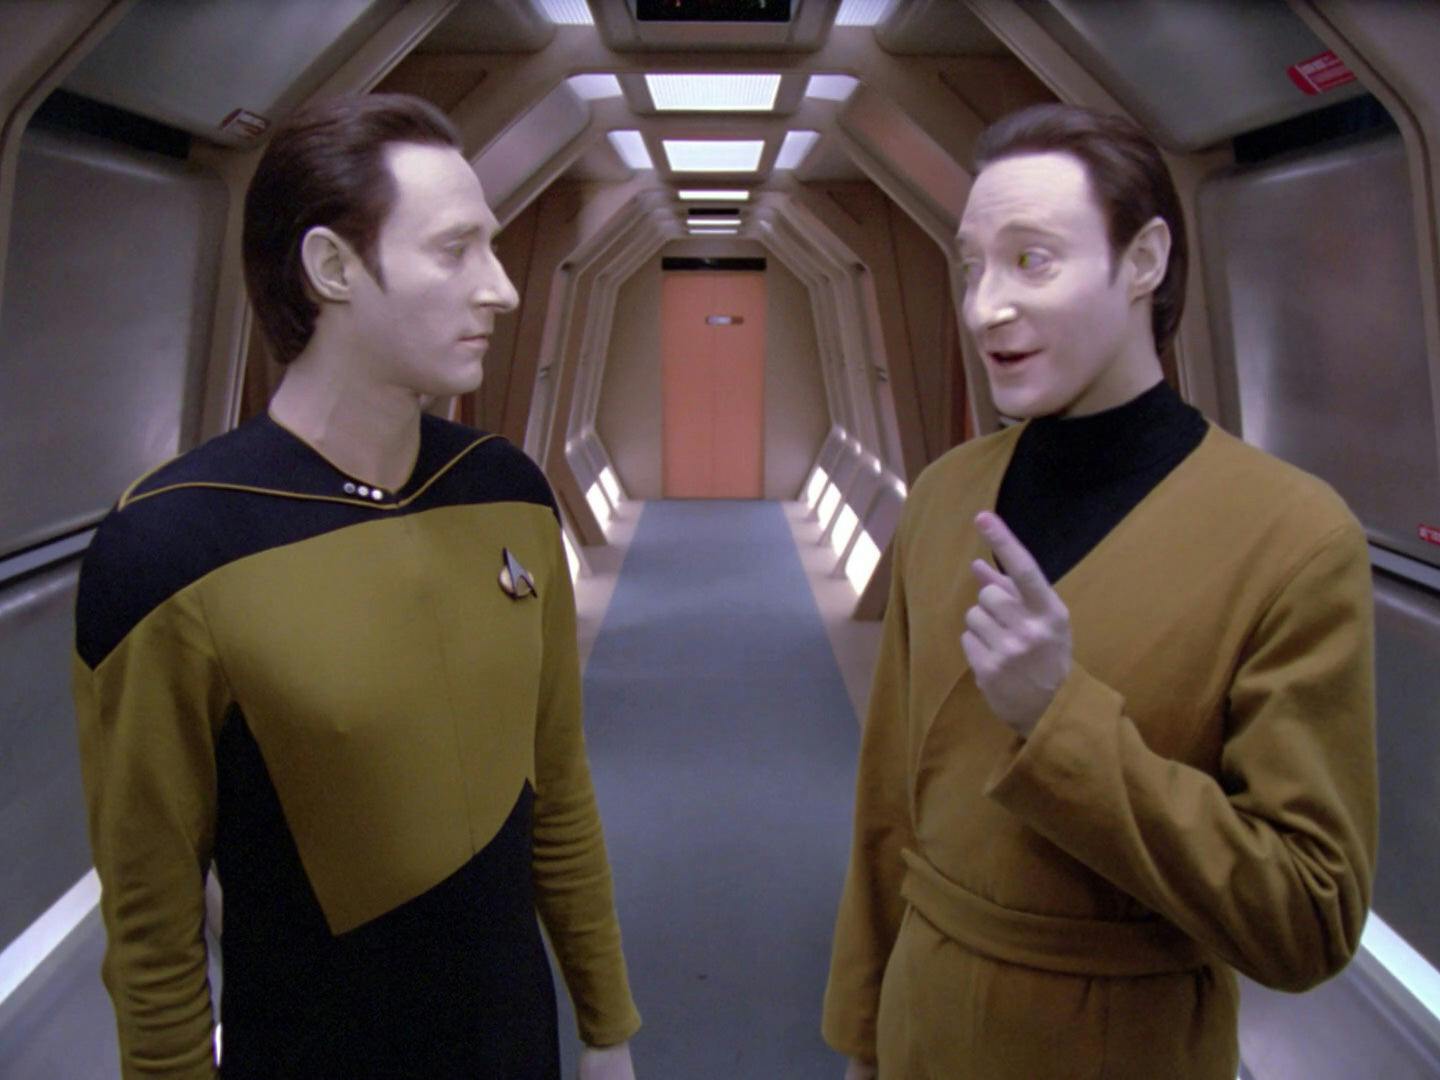 Data and Lore stand in one of the hallways on the Enterprise-D. Data stands to the left, and Lore is on the right. Lore is gesturing and smiling, while Data has a neutral expression.